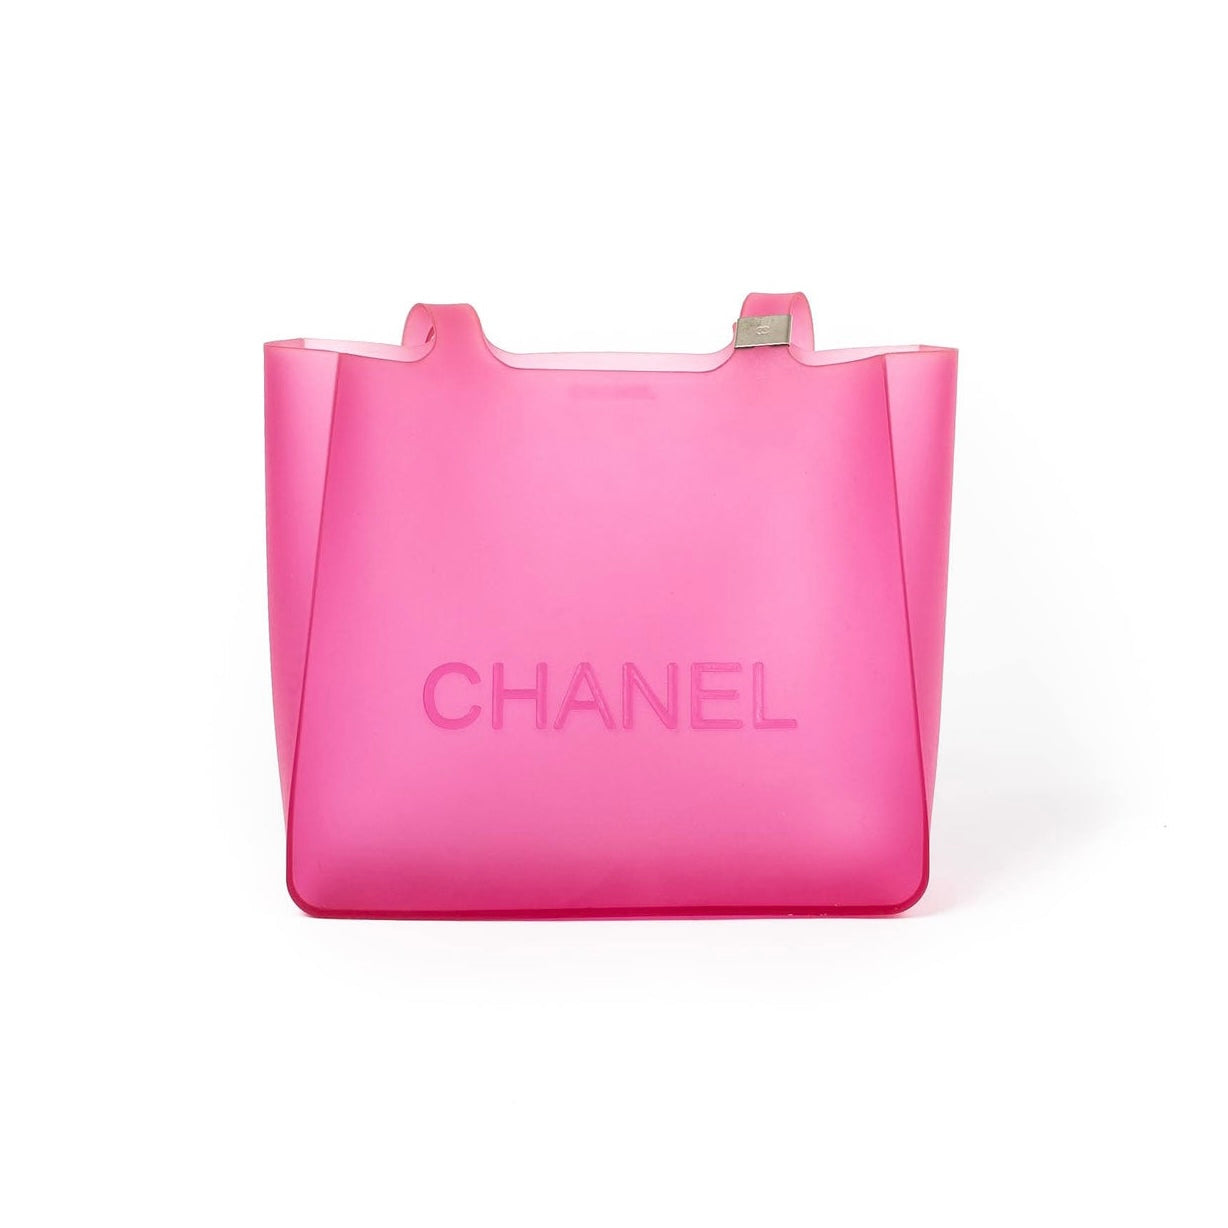 Reworked authentic Chanel make-up bag.